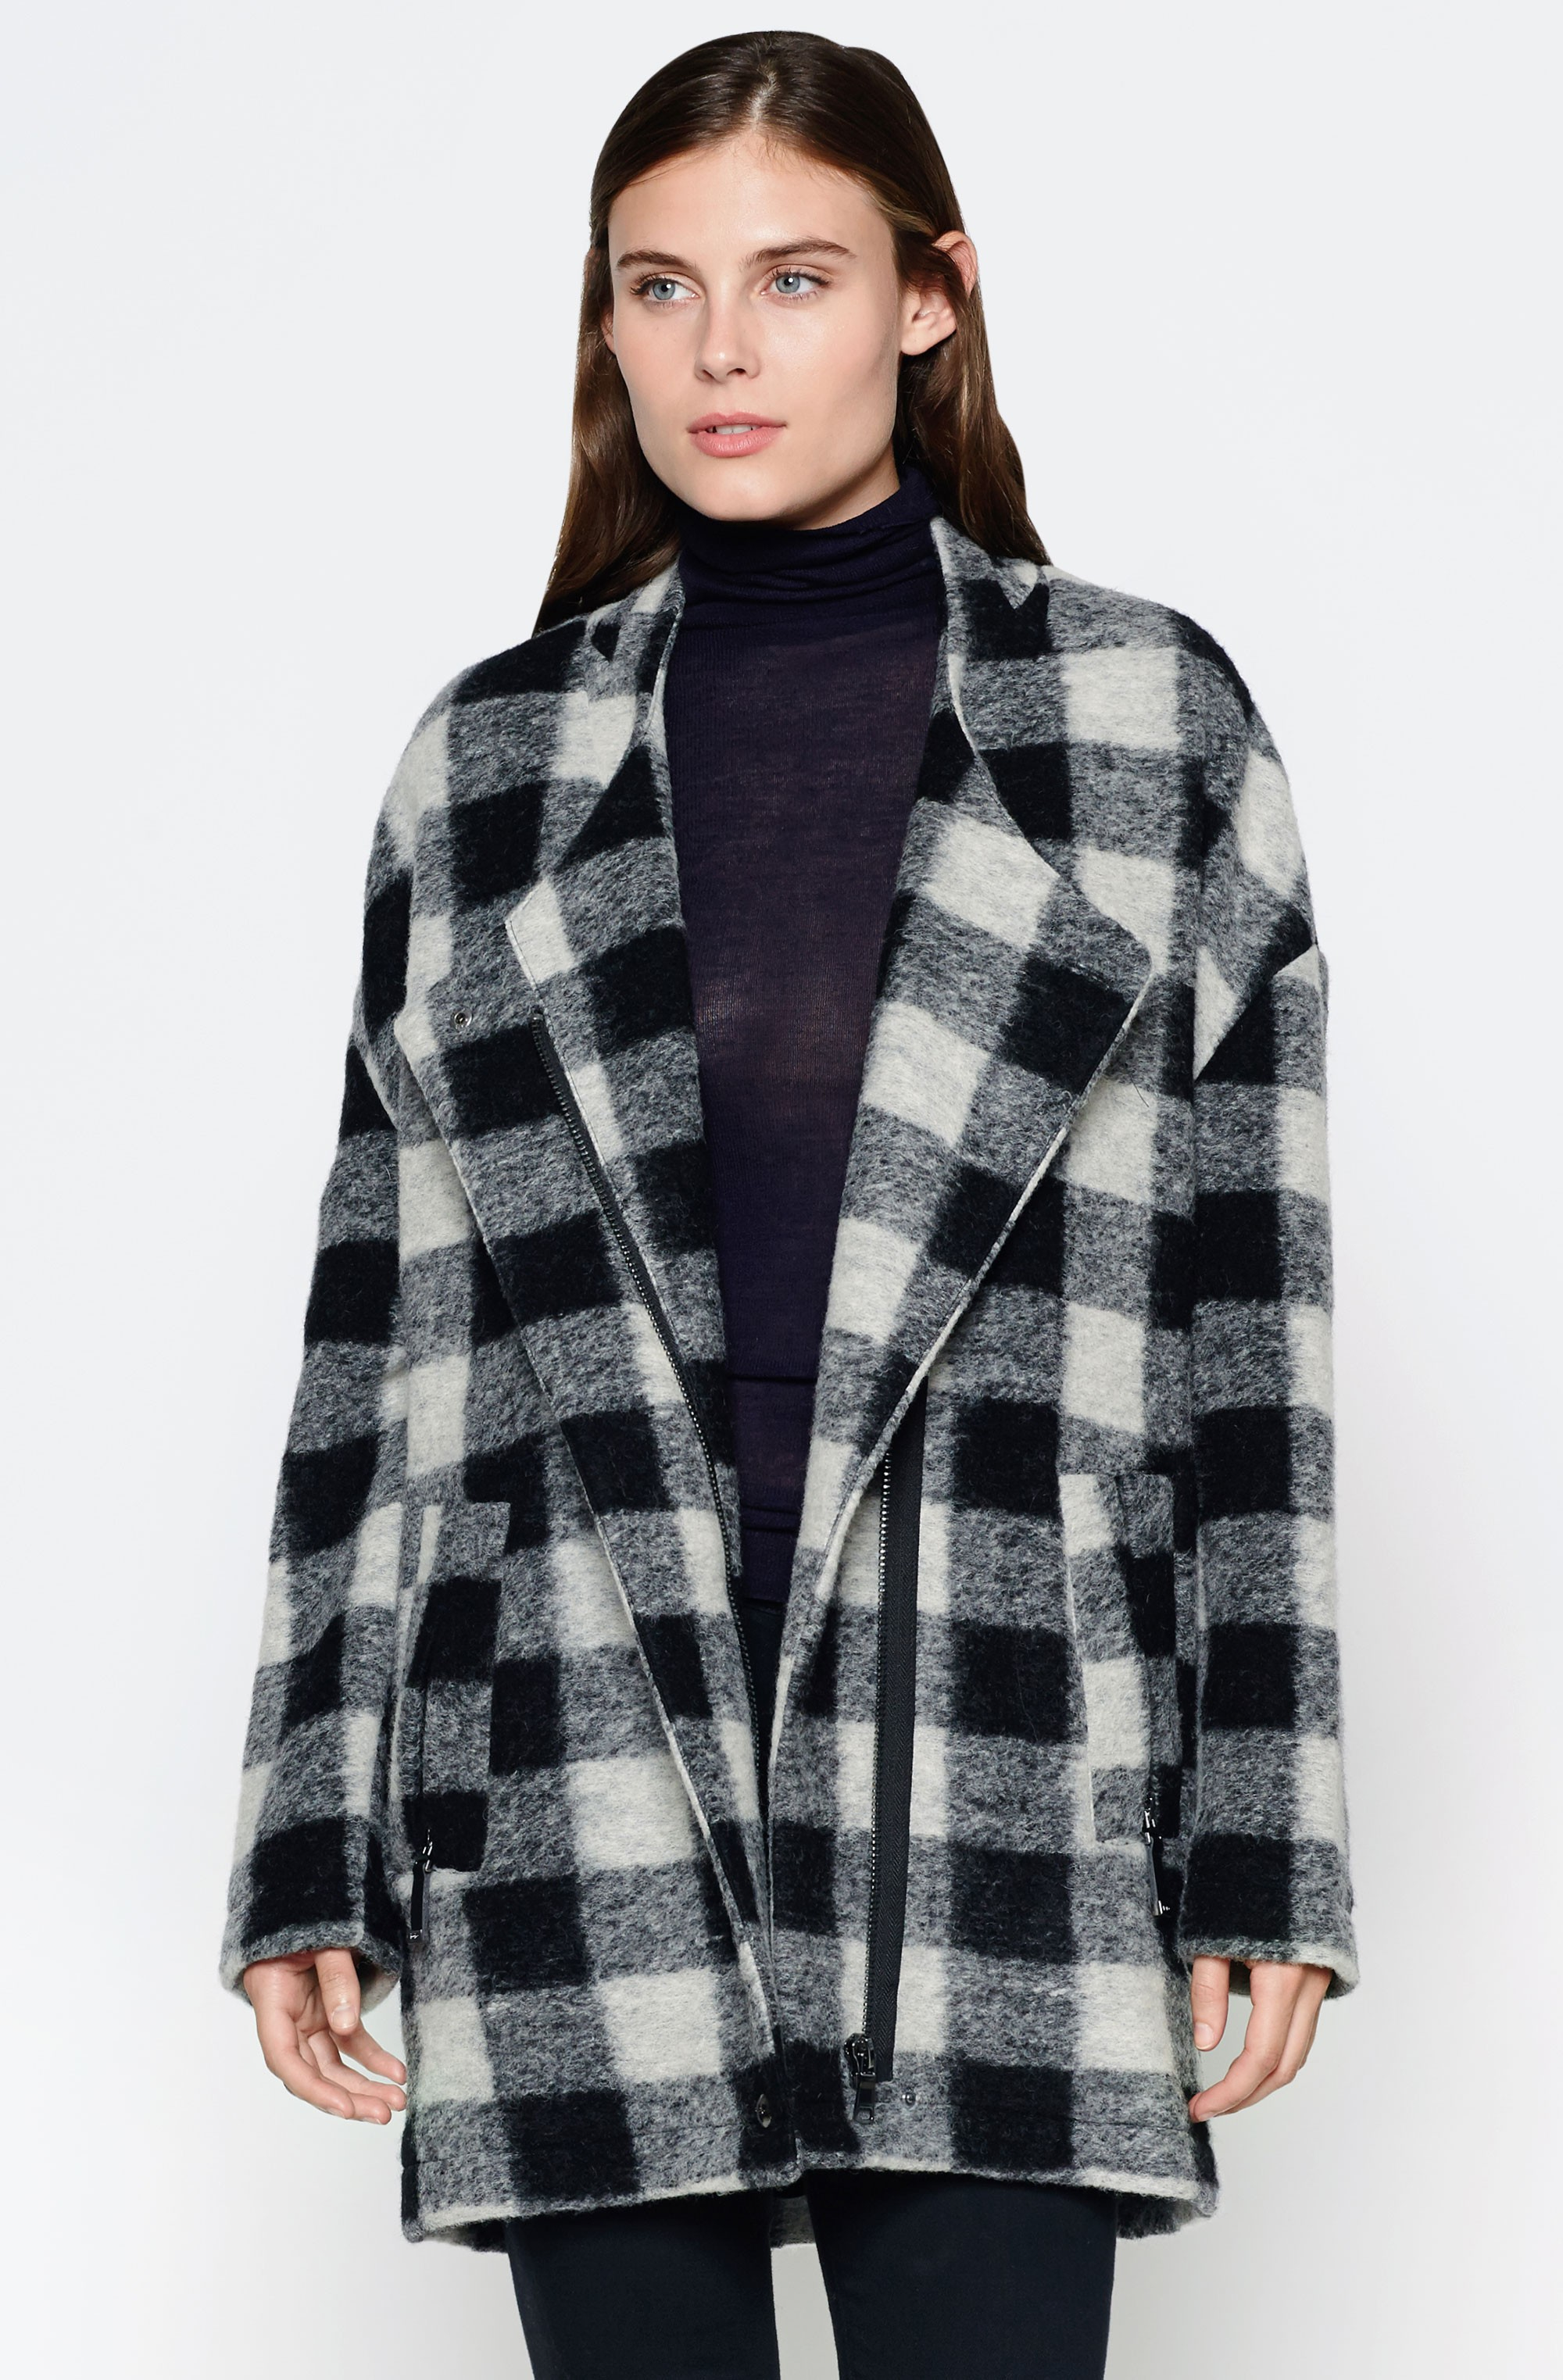 Lyst - Joie Roni River Plaid Coat With Faux-fur Hood in Gray